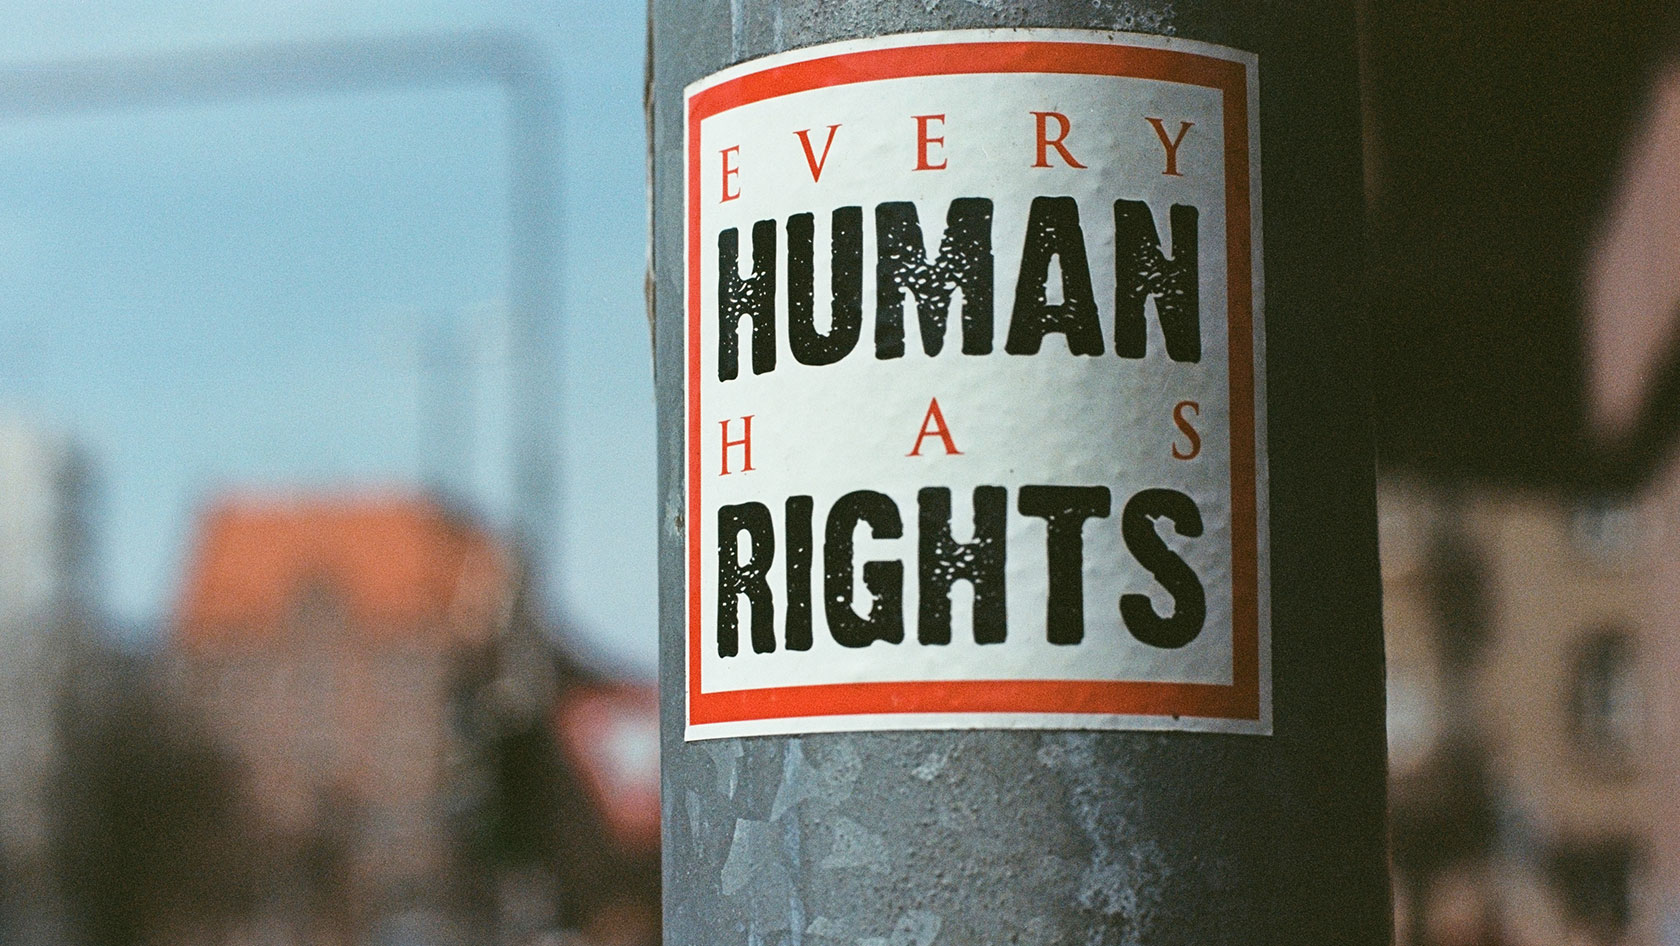 "Every Human Has Rights" (Sticker on a lamp post)